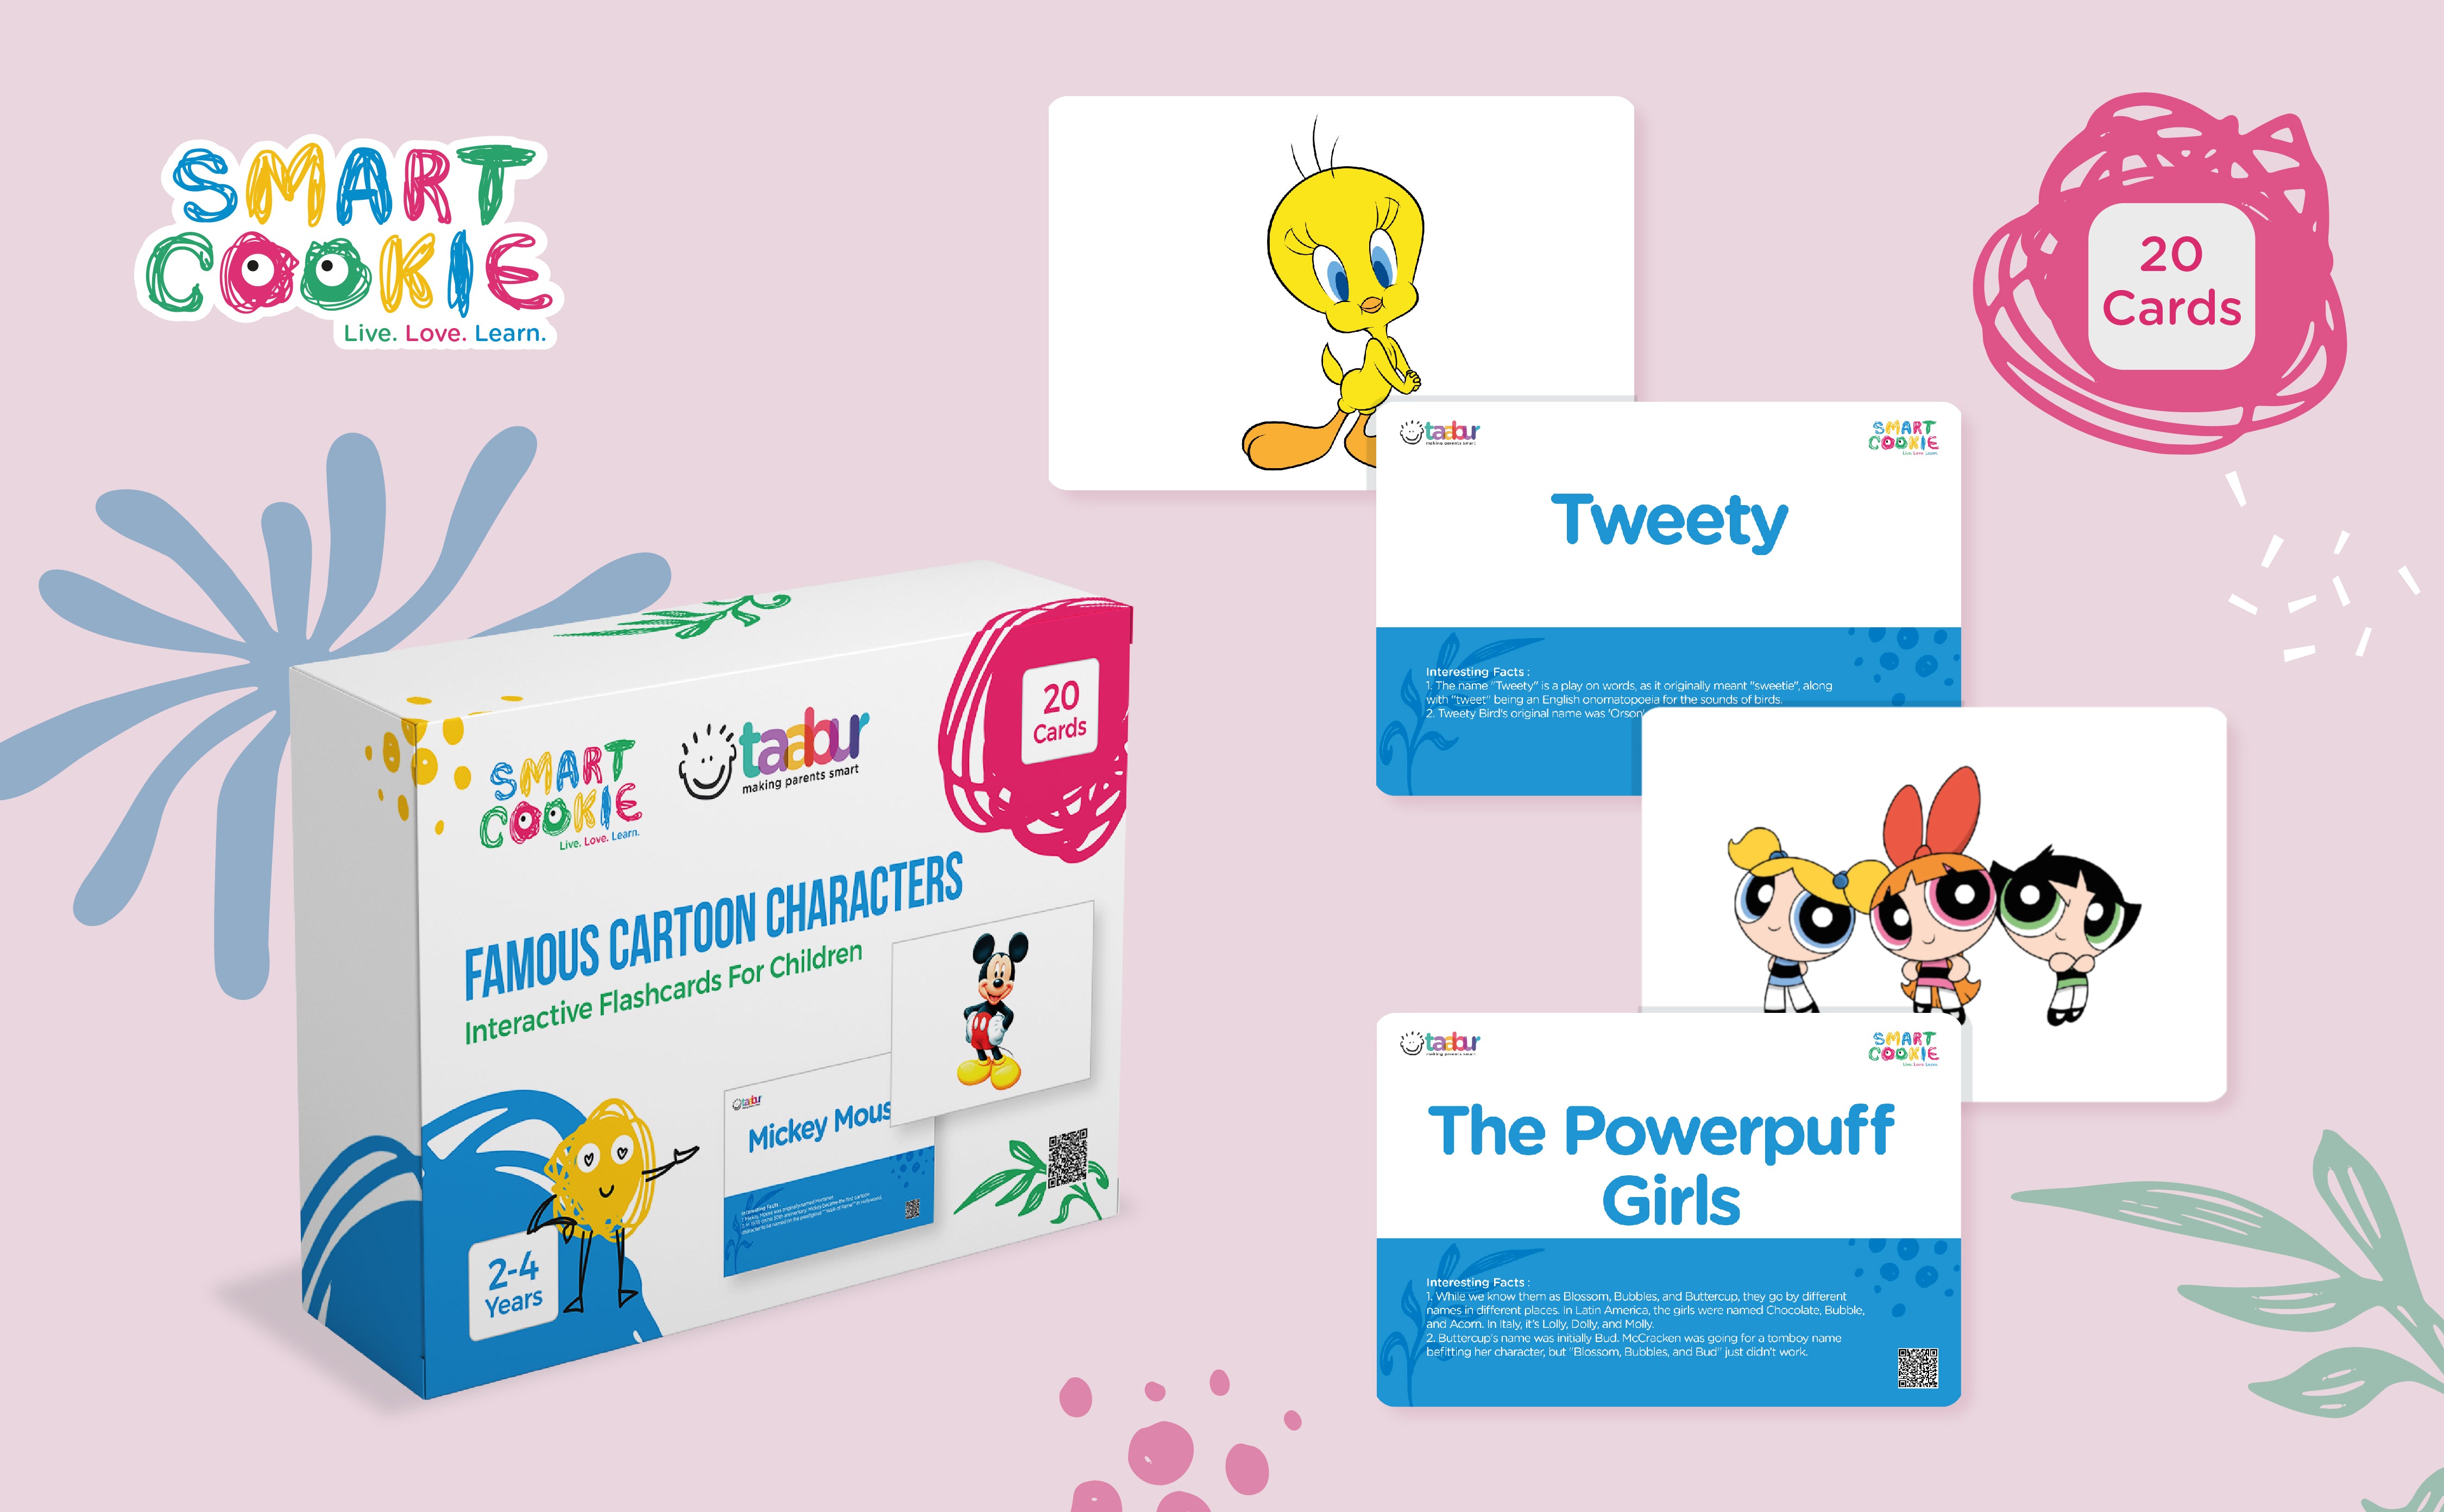 Famous Cartoon Characters - Interactive Flash Cards for Children (20 Cards) - for Kids Aged 2 to 4 Years Old